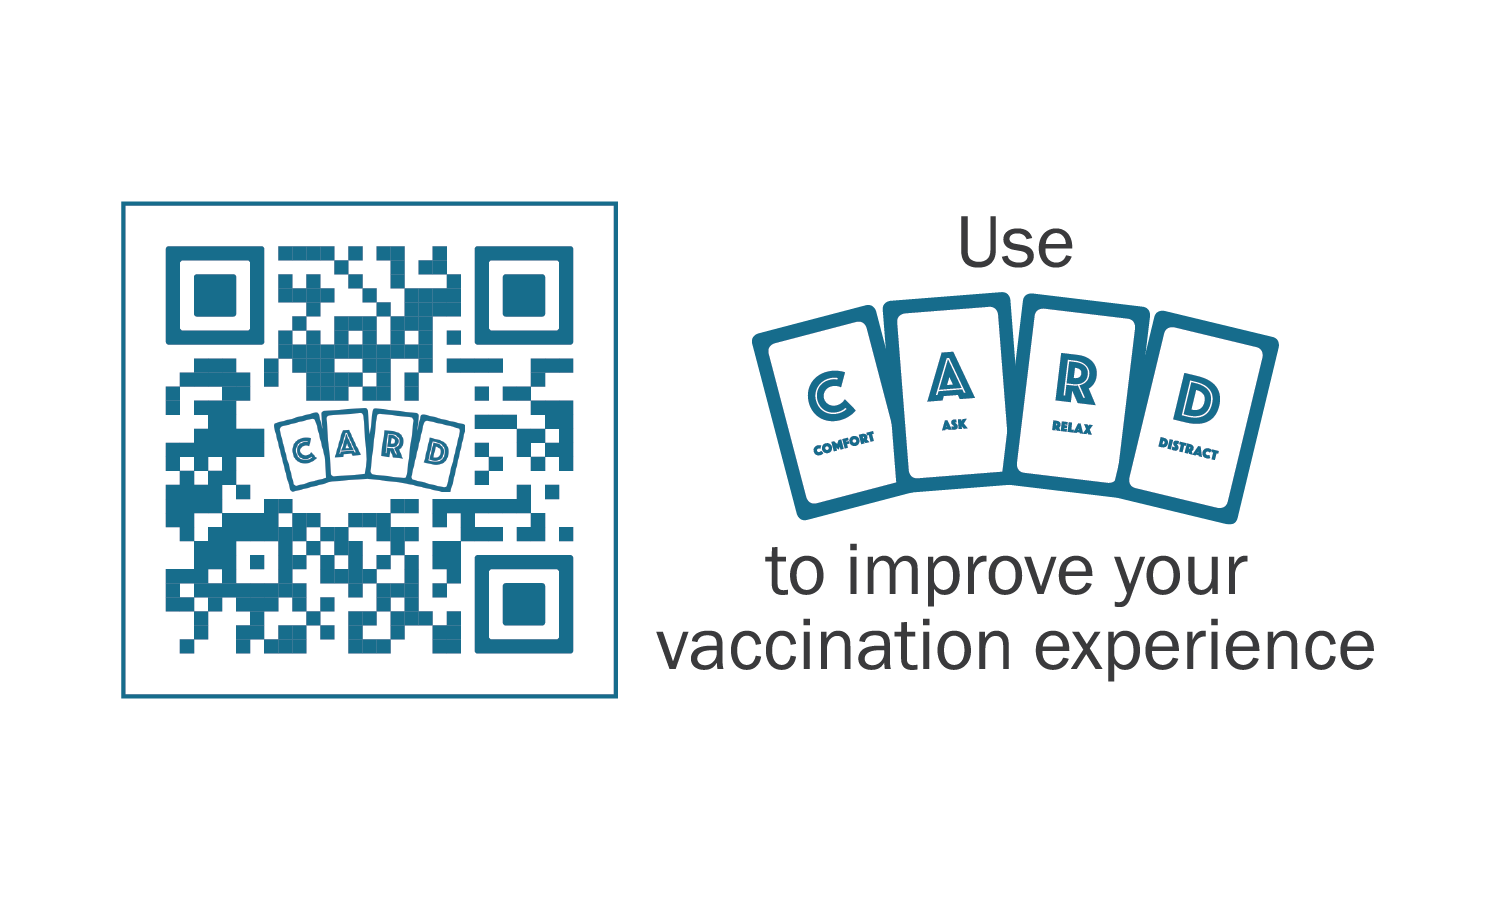 Use CARD to improve your vaccination experience: QR code